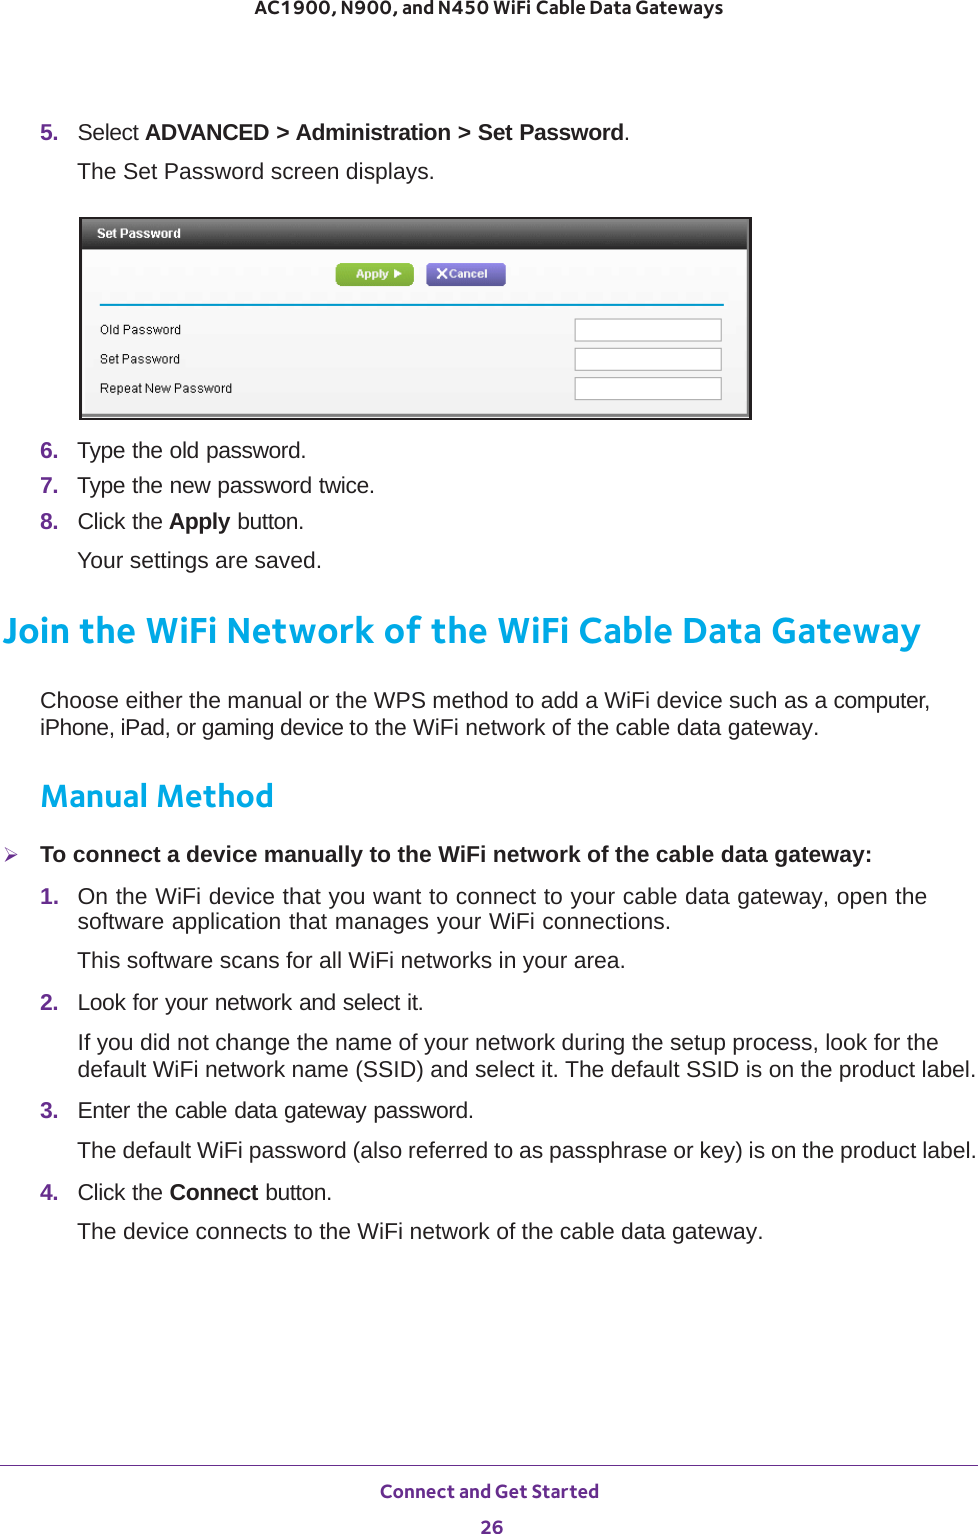 Connect and Get Started 26AC1900, N900, and N450 WiFi Cable Data Gateways 5.  Select ADVANCED &gt; Administration &gt; Set Password.The Set Password screen displays.6.  Type the old password.7.  Type the new password twice.8.  Click the Apply button.Your settings are saved.Join the WiFi Network of the WiFi Cable Data GatewayChoose either the manual or the WPS method to add a WiFi device such as a computer, iPhone, iPad, or gaming device to the WiFi network of the cable data gateway.Manual MethodTo connect a device manually to the WiFi network of the cable data gateway:1.  On the WiFi device that you want to connect to your cable data gateway, open the software application that manages your WiFi connections.This software scans for all WiFi networks in your area.2.  Look for your network and select it. If you did not change the name of your network during the setup process, look for the default WiFi network name (SSID) and select it. The default SSID is on the product label.3.  Enter the cable data gateway password.The default WiFi password (also referred to as passphrase or key) is on the product label.4.  Click the Connect button.The device connects to the WiFi network of the cable data gateway.